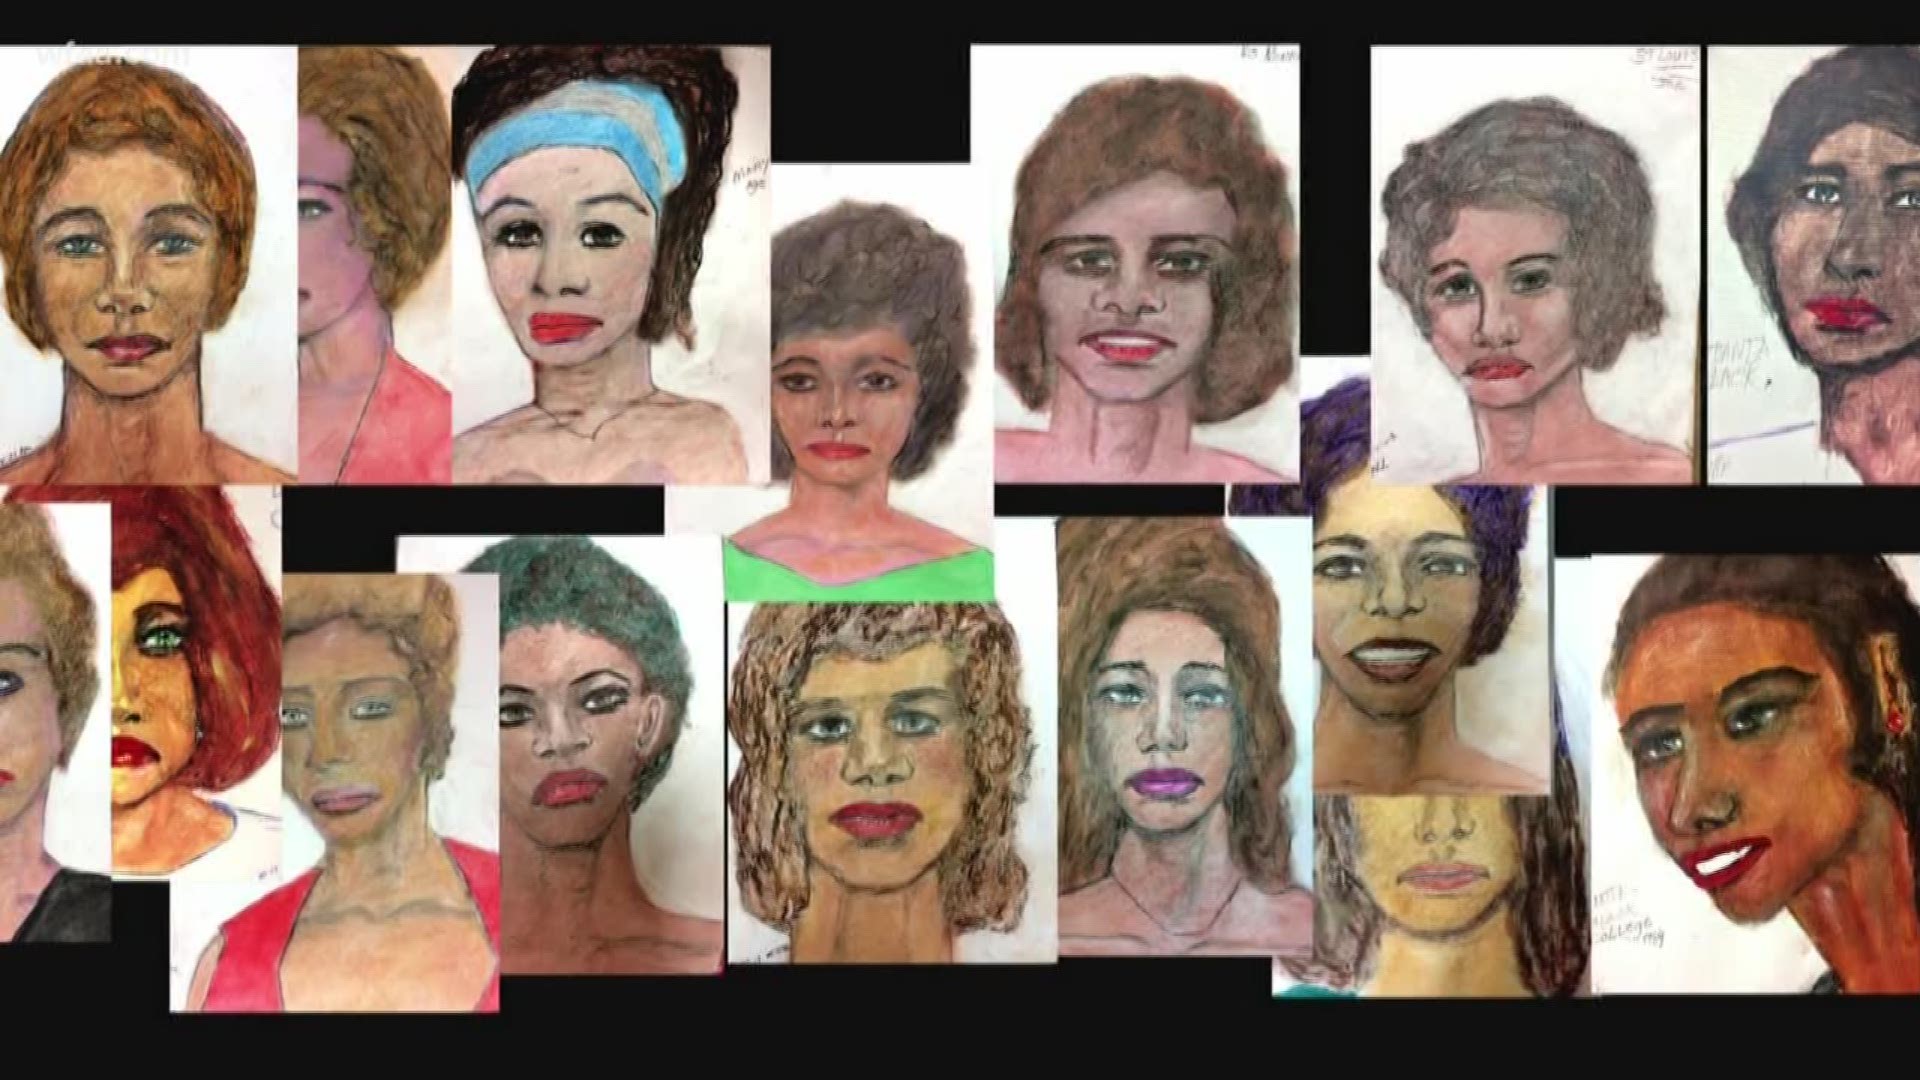 Samuel Little has drawn at least 16 sketches of women he says he killed over a four-decade run. Two of the sketches depict women he says he killed in Texas.